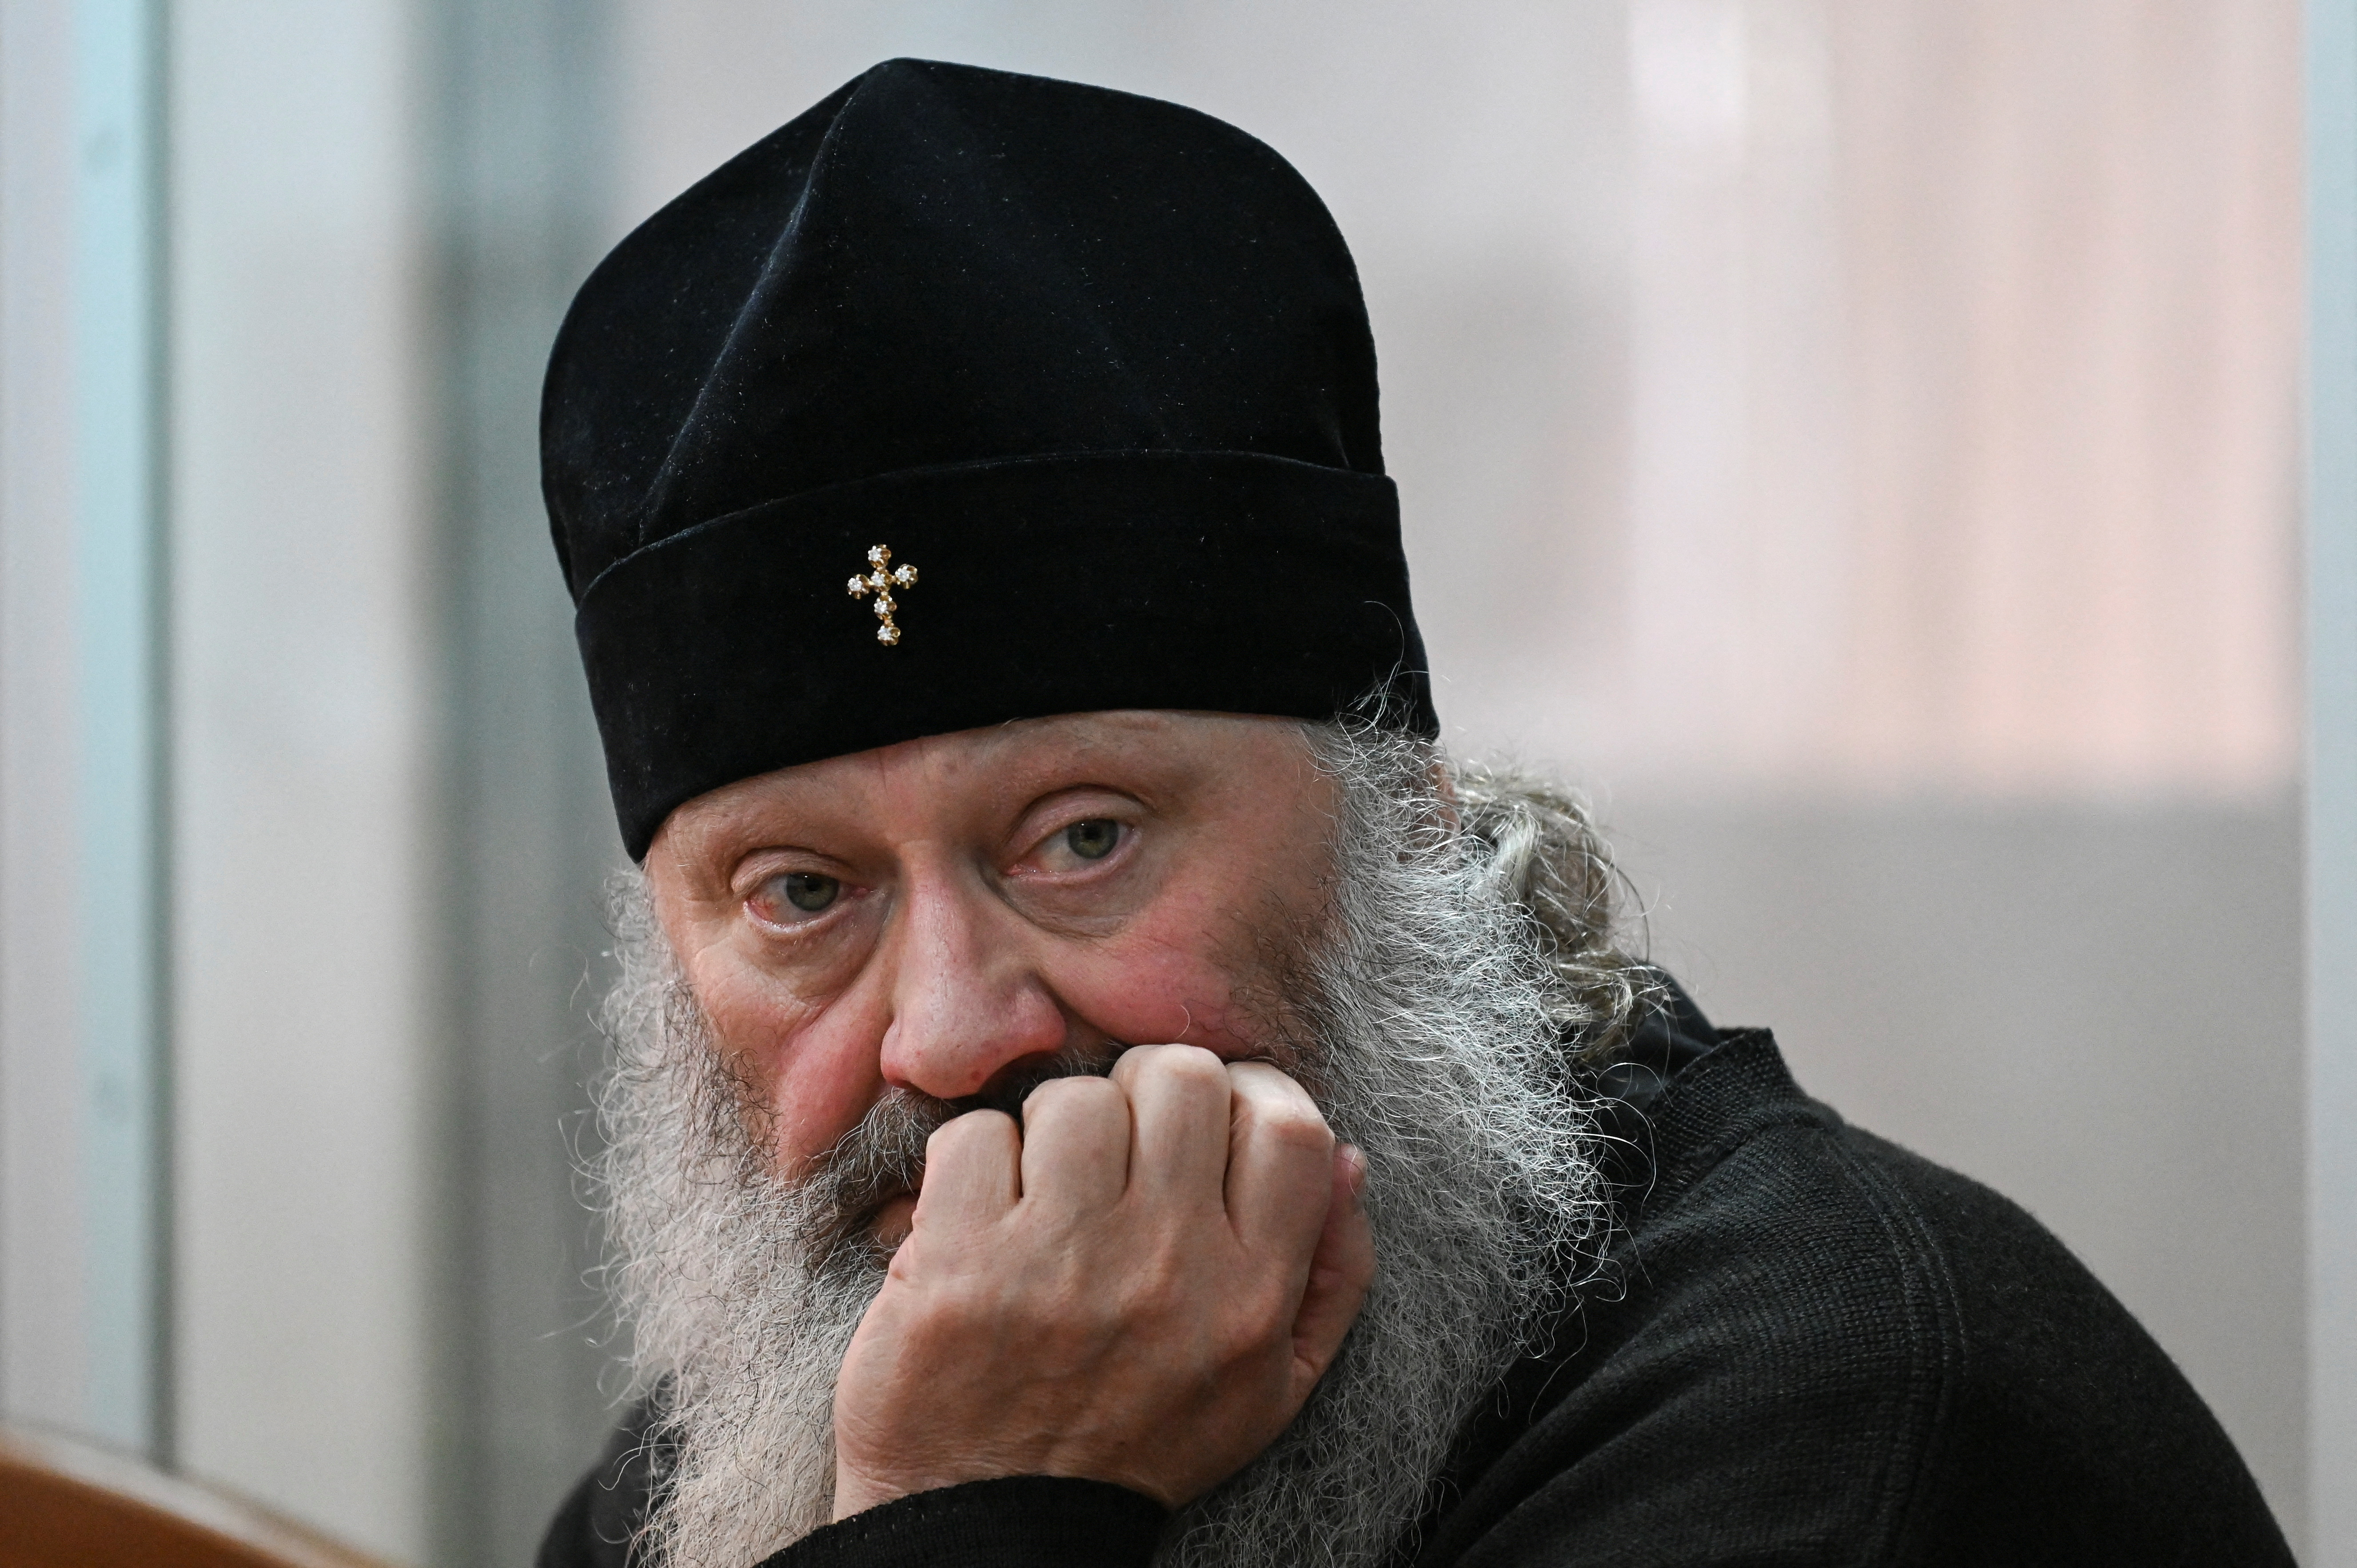 Metropolitan Pavlo of the Ukrainian Orthodox Church, accused of being linked to Moscow, attends a coart hearing in Kyiv